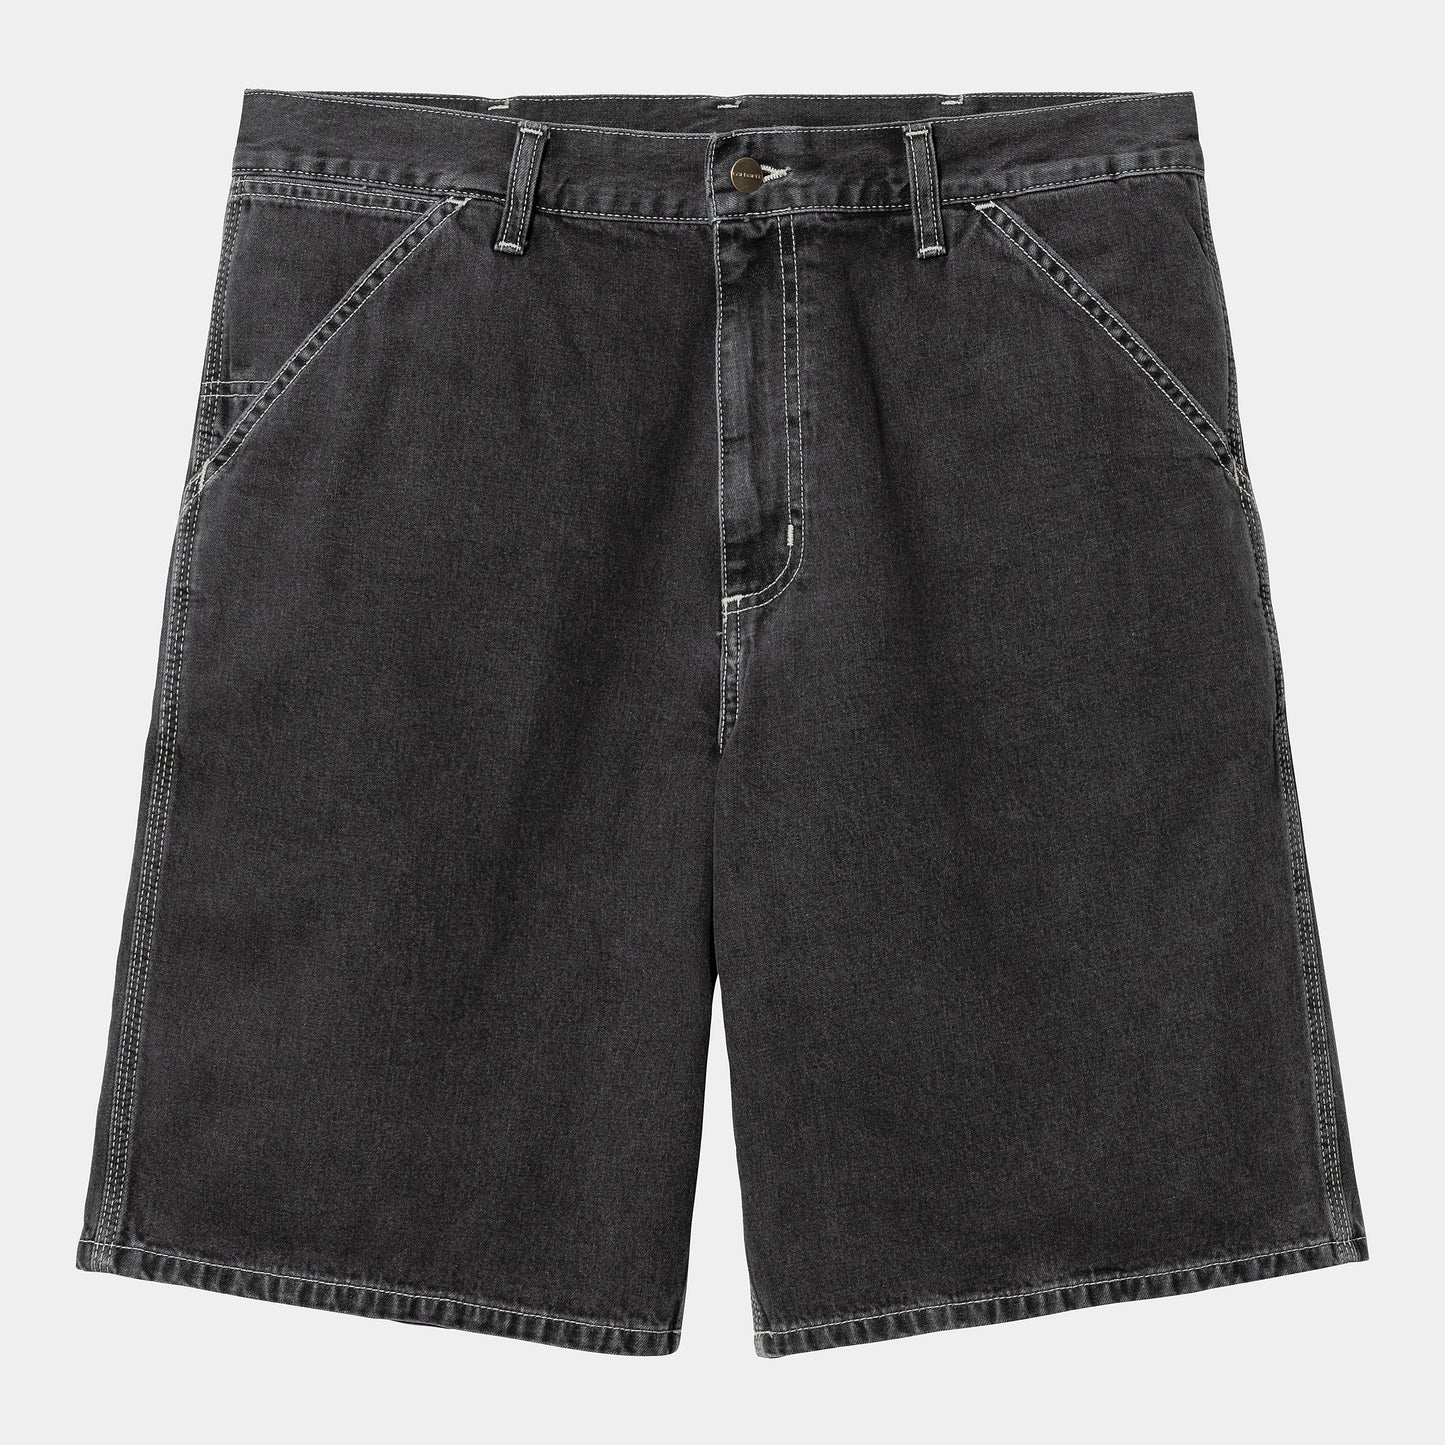 CARHARTT WIP Simple Short - Black (Heavy Stone Washed)